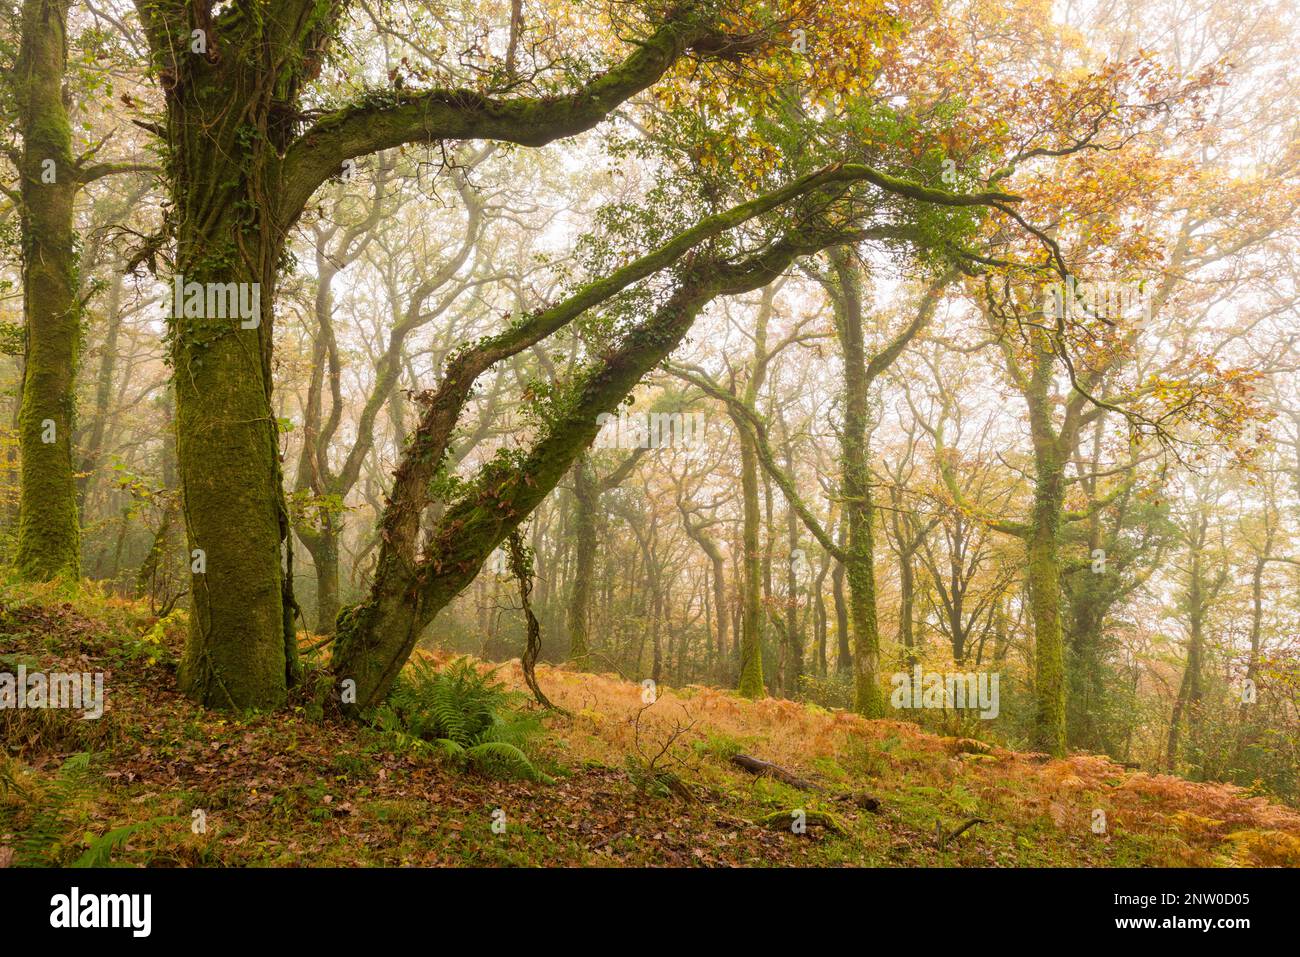 Autumn colour at Looseall Wood near Dulverton in the Exmoor National Park, Somerset, England. Stock Photo